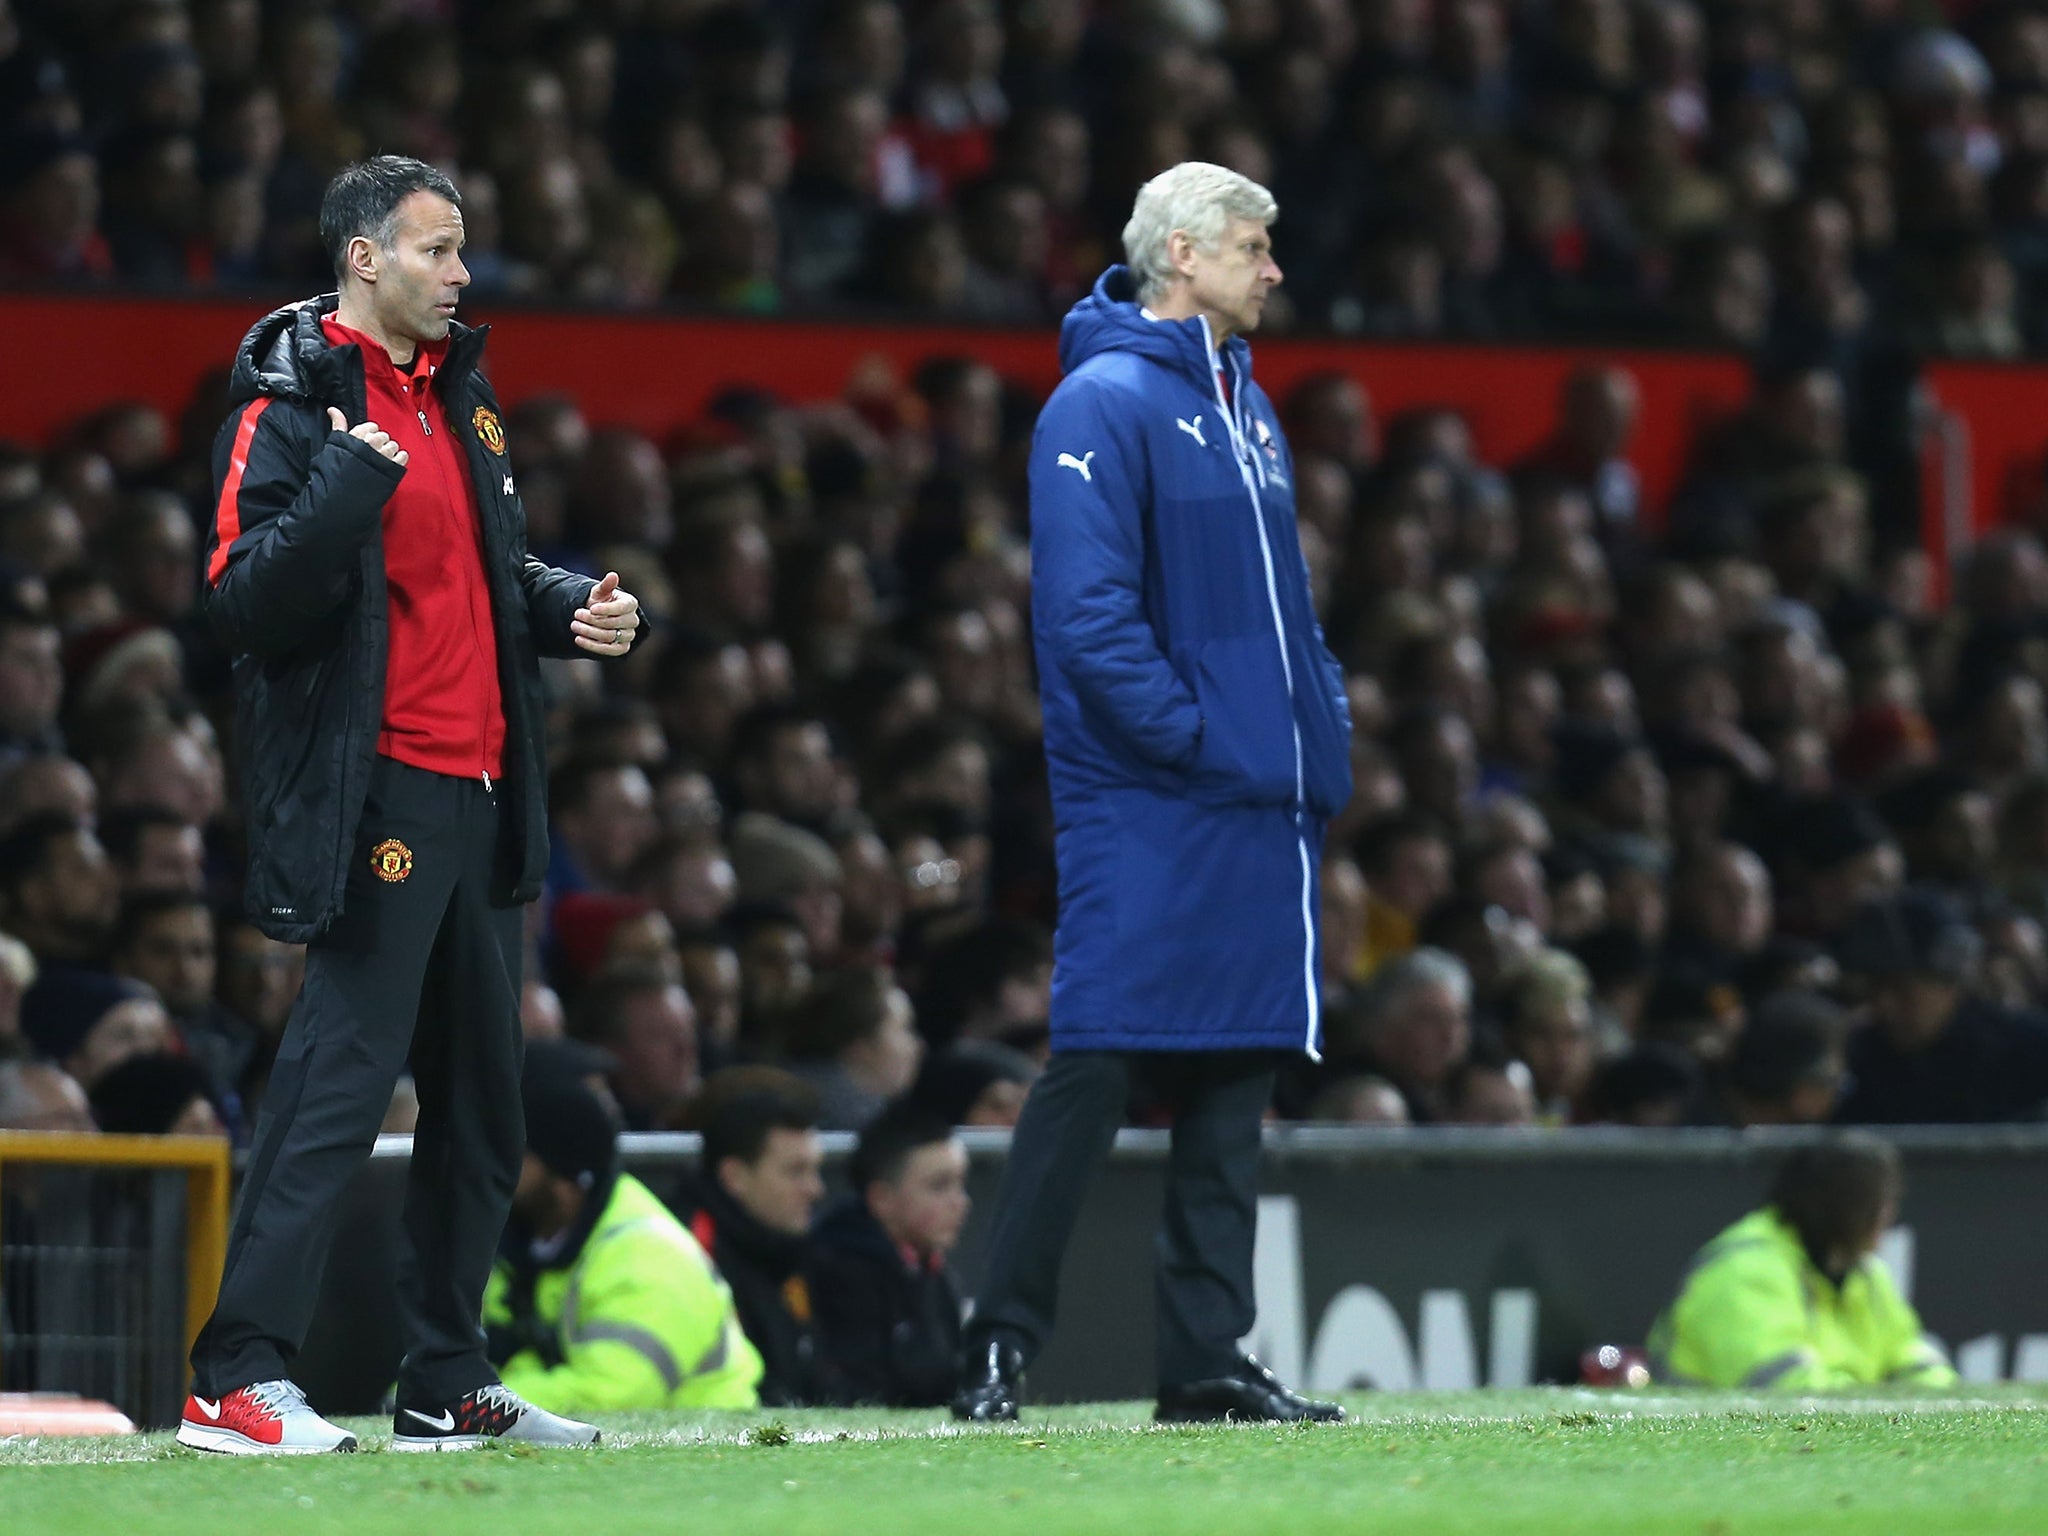 Arsene Wenger and Ryan Giggs on the sidelines